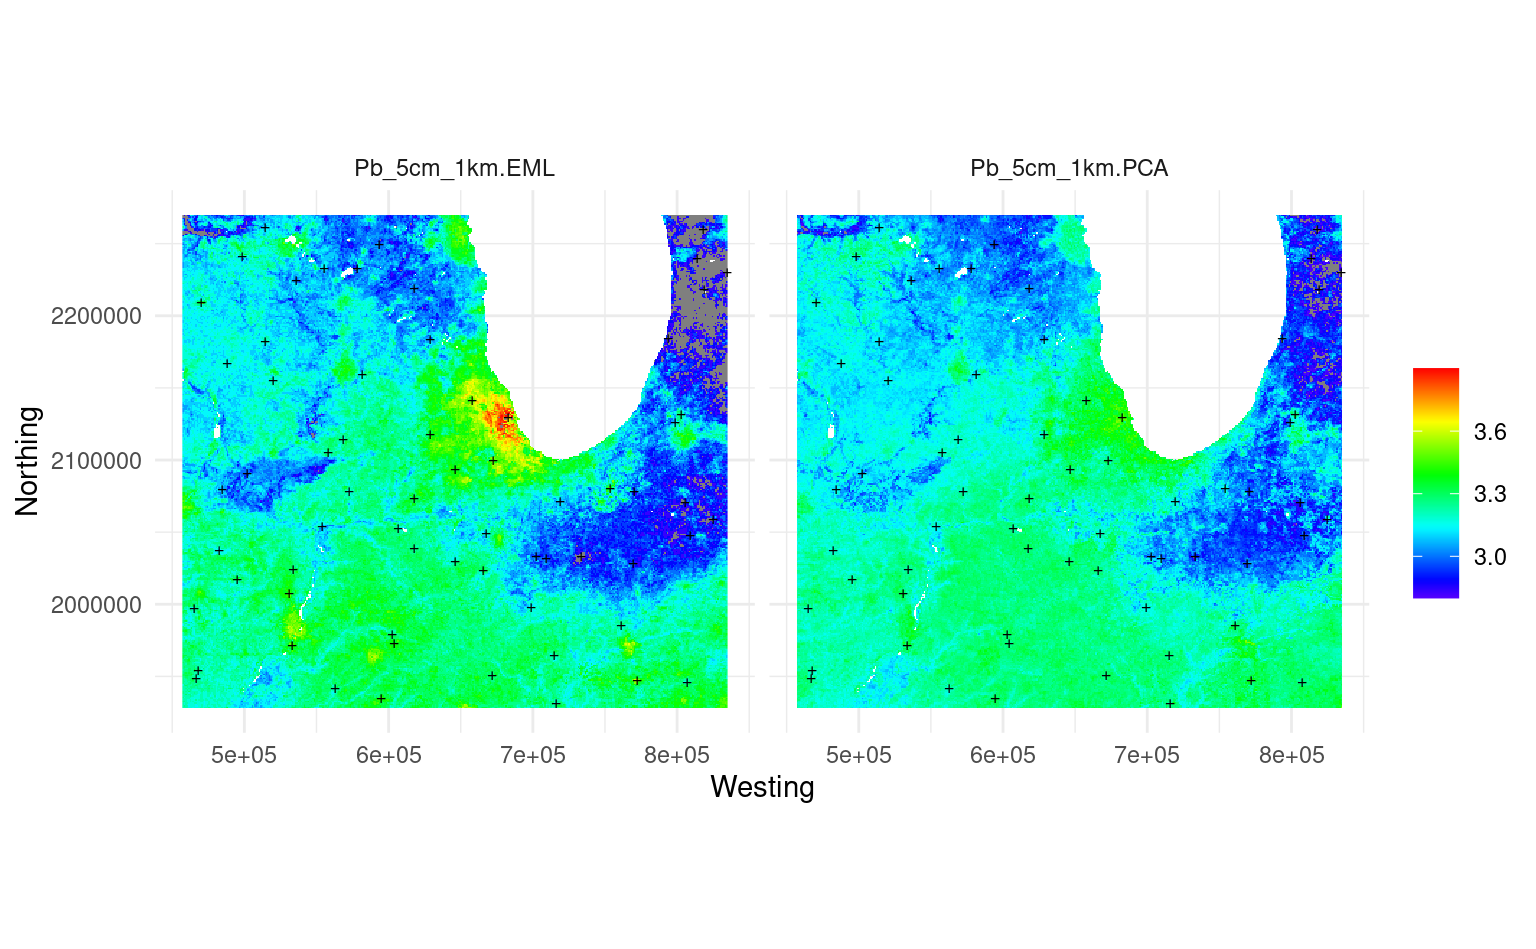 Predicted Pb concentration using ensemble ML (left) vs using the decomposition-composition PCA method (right).